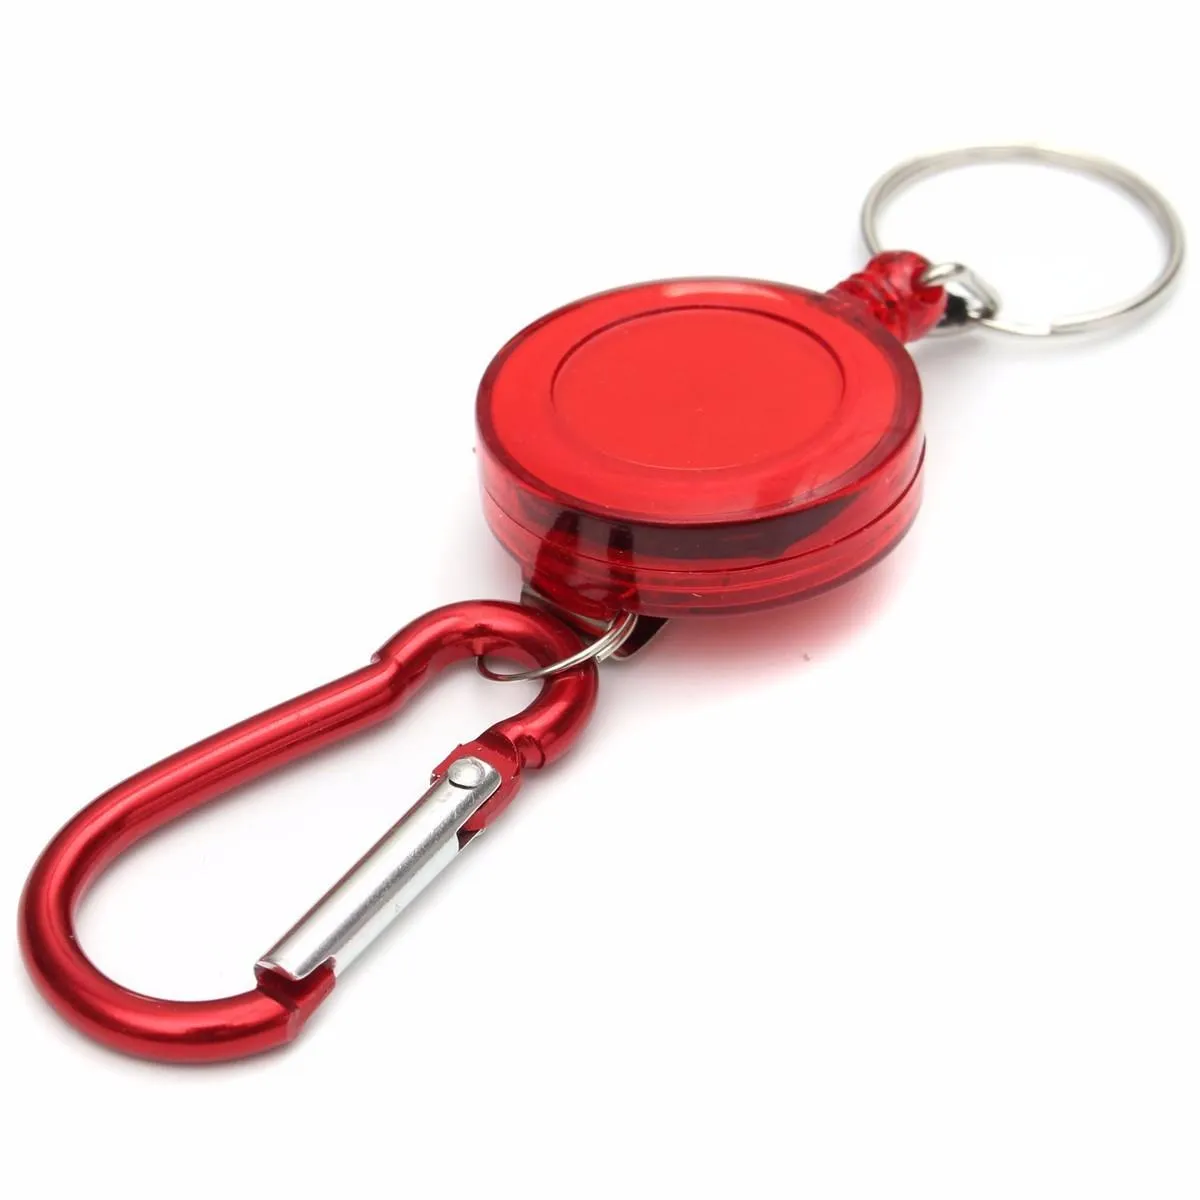 Retractable Floating Keychain With Badge Reel, ID Badge Lanyard, Name Tag,  Key Card Holder, Belt Clip, And Key Ring From Toponewholesaler, $0.35